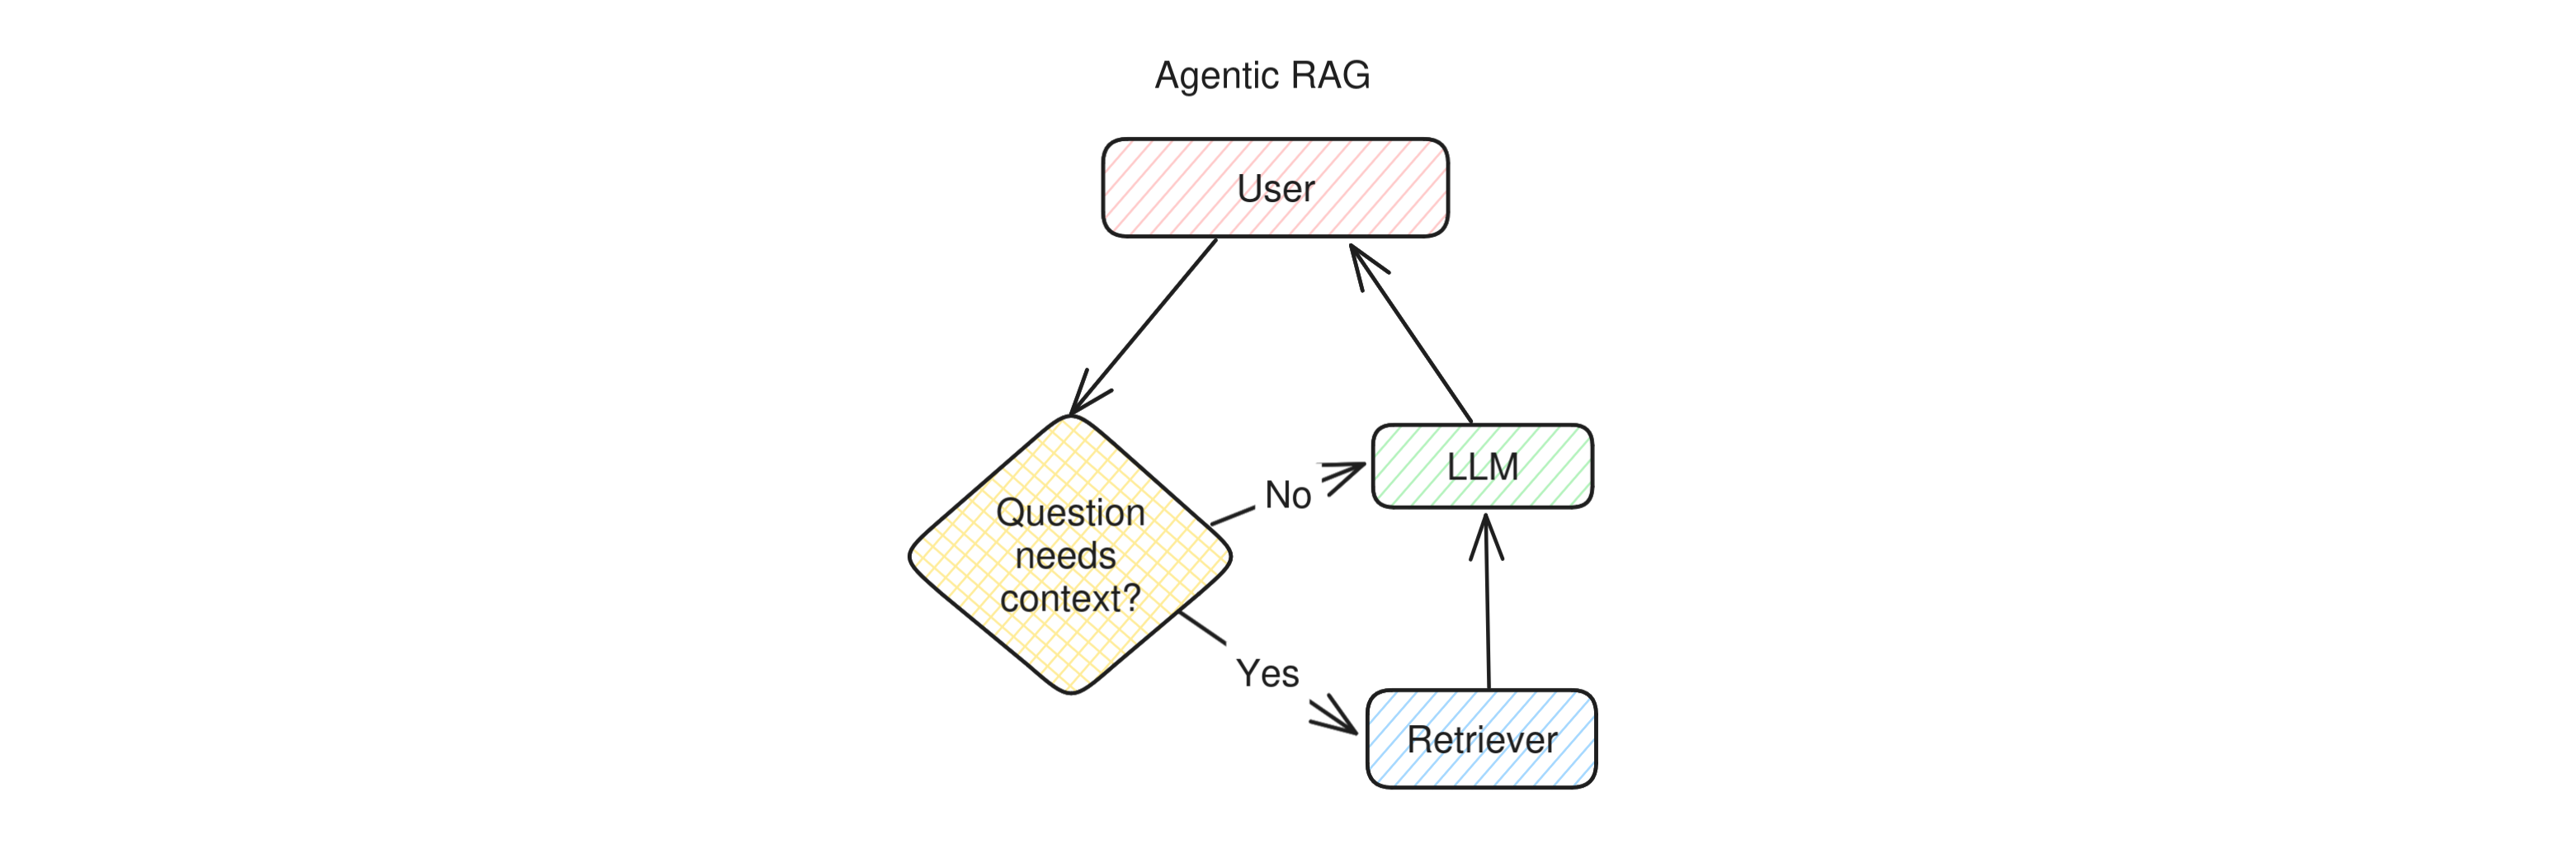 Diagram of the operation of an agentic RAG app: when the user asks a question, before calling the retriever the app checks whether the retrieval step is necessary at all. Once the check is done, if retrieval was necessary it is run, otherwise the app skips directly to the LLM, which then replies to the user.